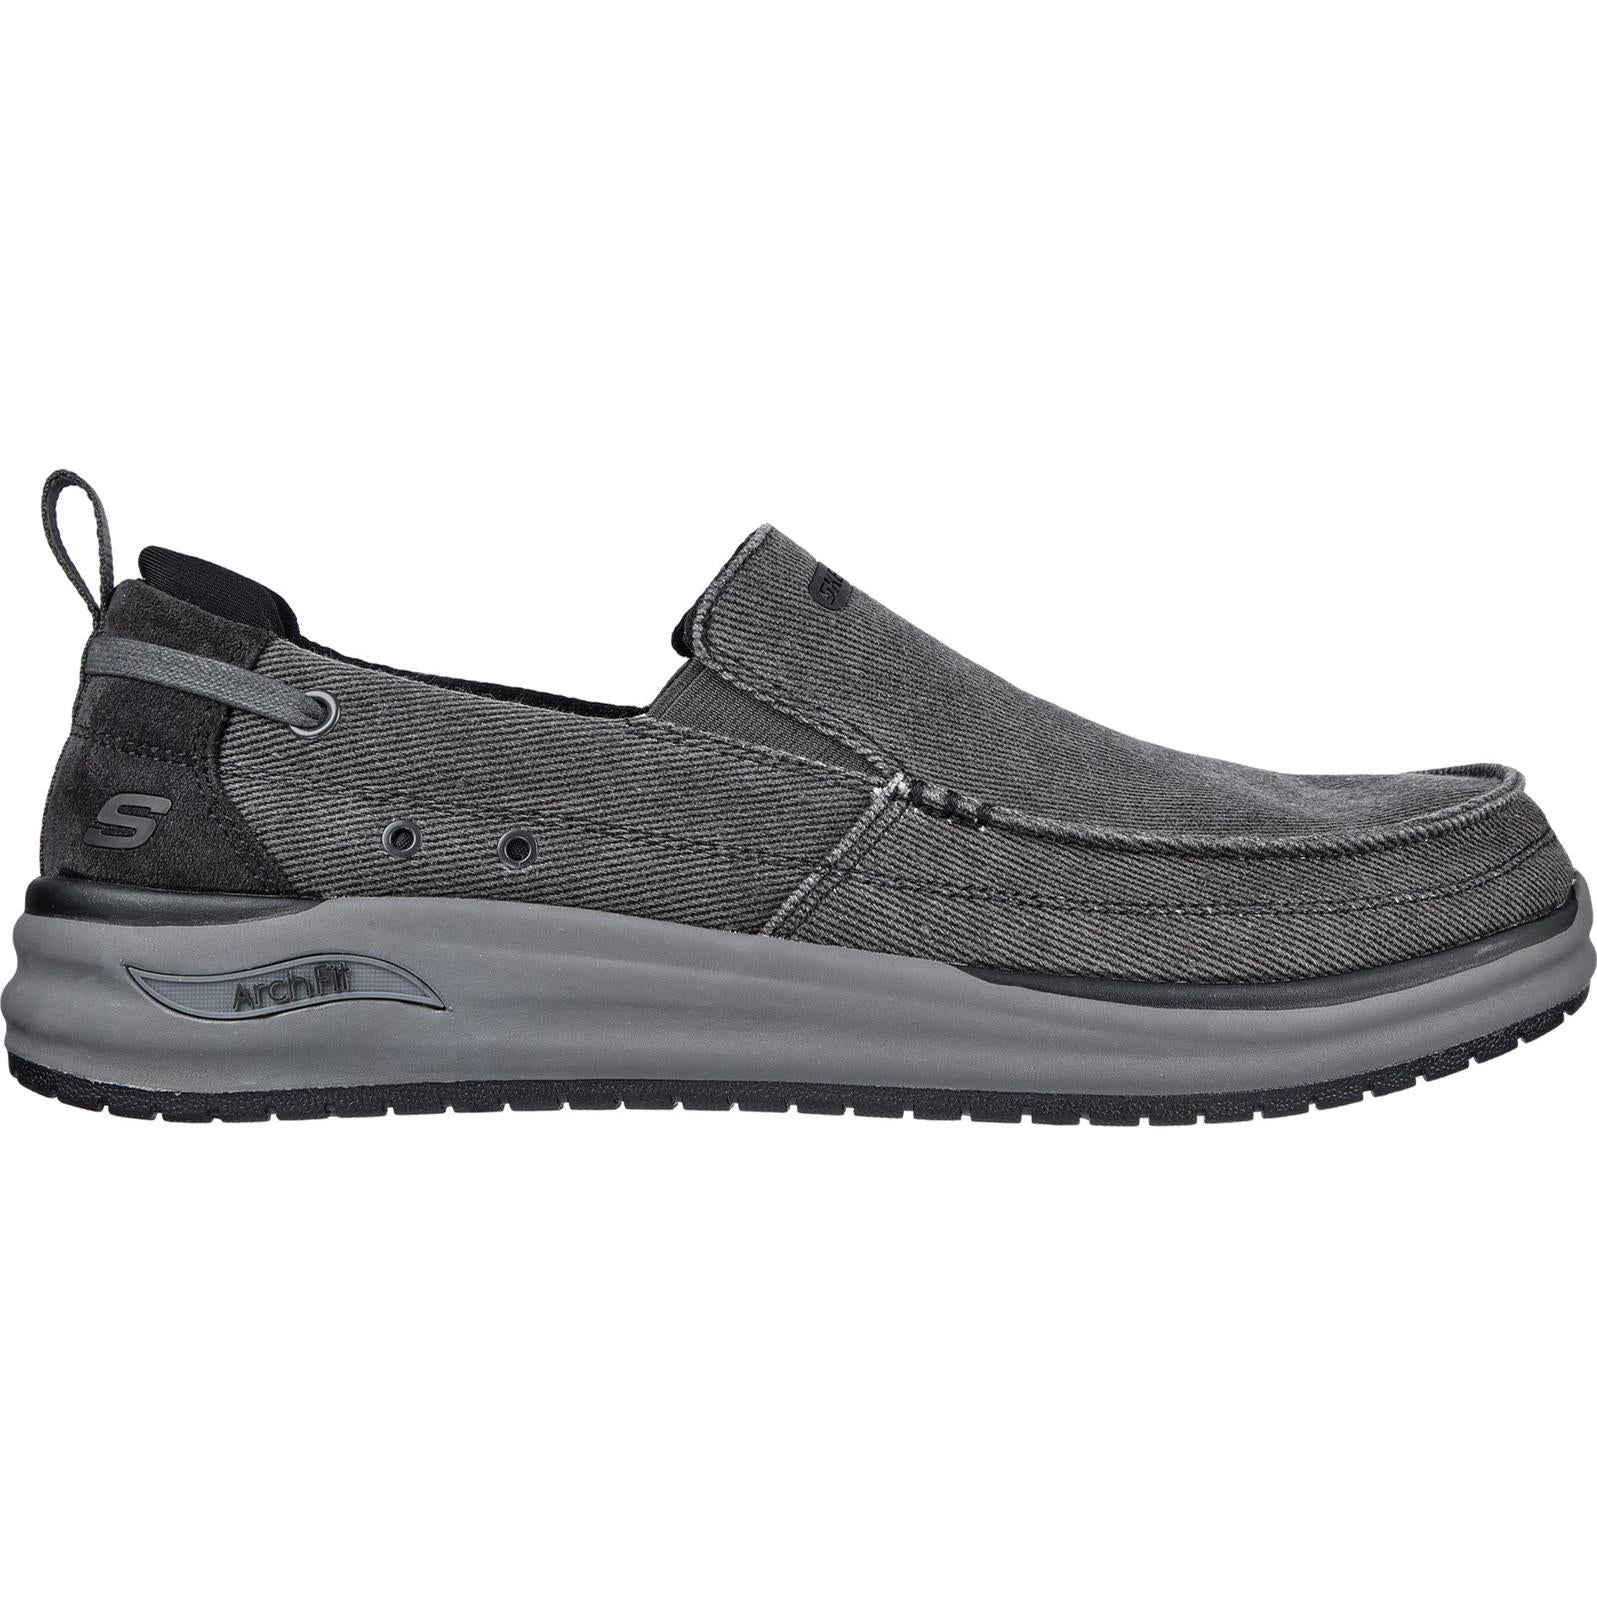 Skechers Arch Fit Melo Port Bow Shoes